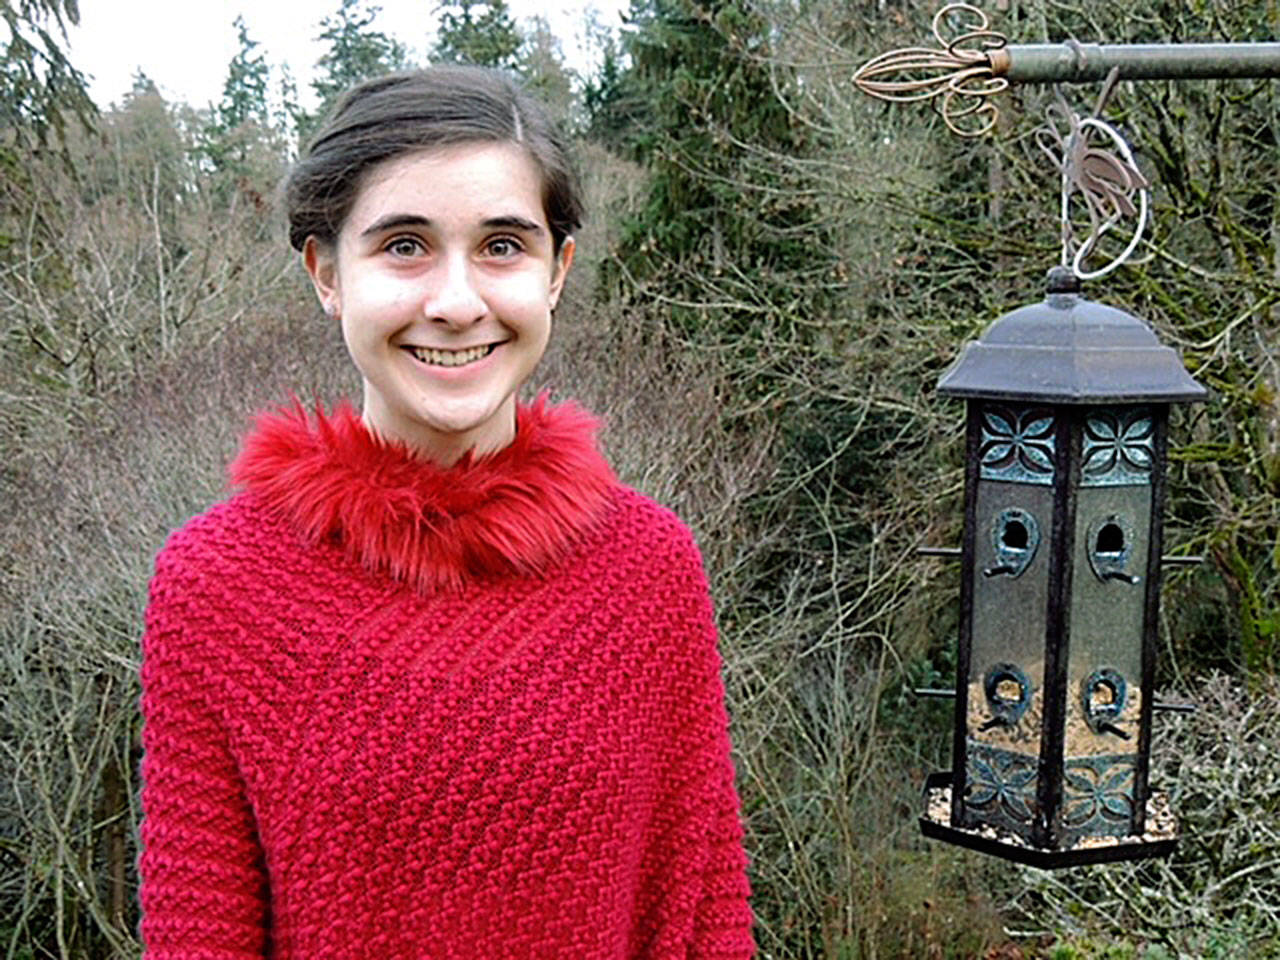 Federal Way resident Natalie Wilson, 15, serves as the publicity chair of the Rainier Audubon Society. For bird watching, there are three bird feeders and a bird bath in her backyard. Photo courtesy of Lorraine Wilson